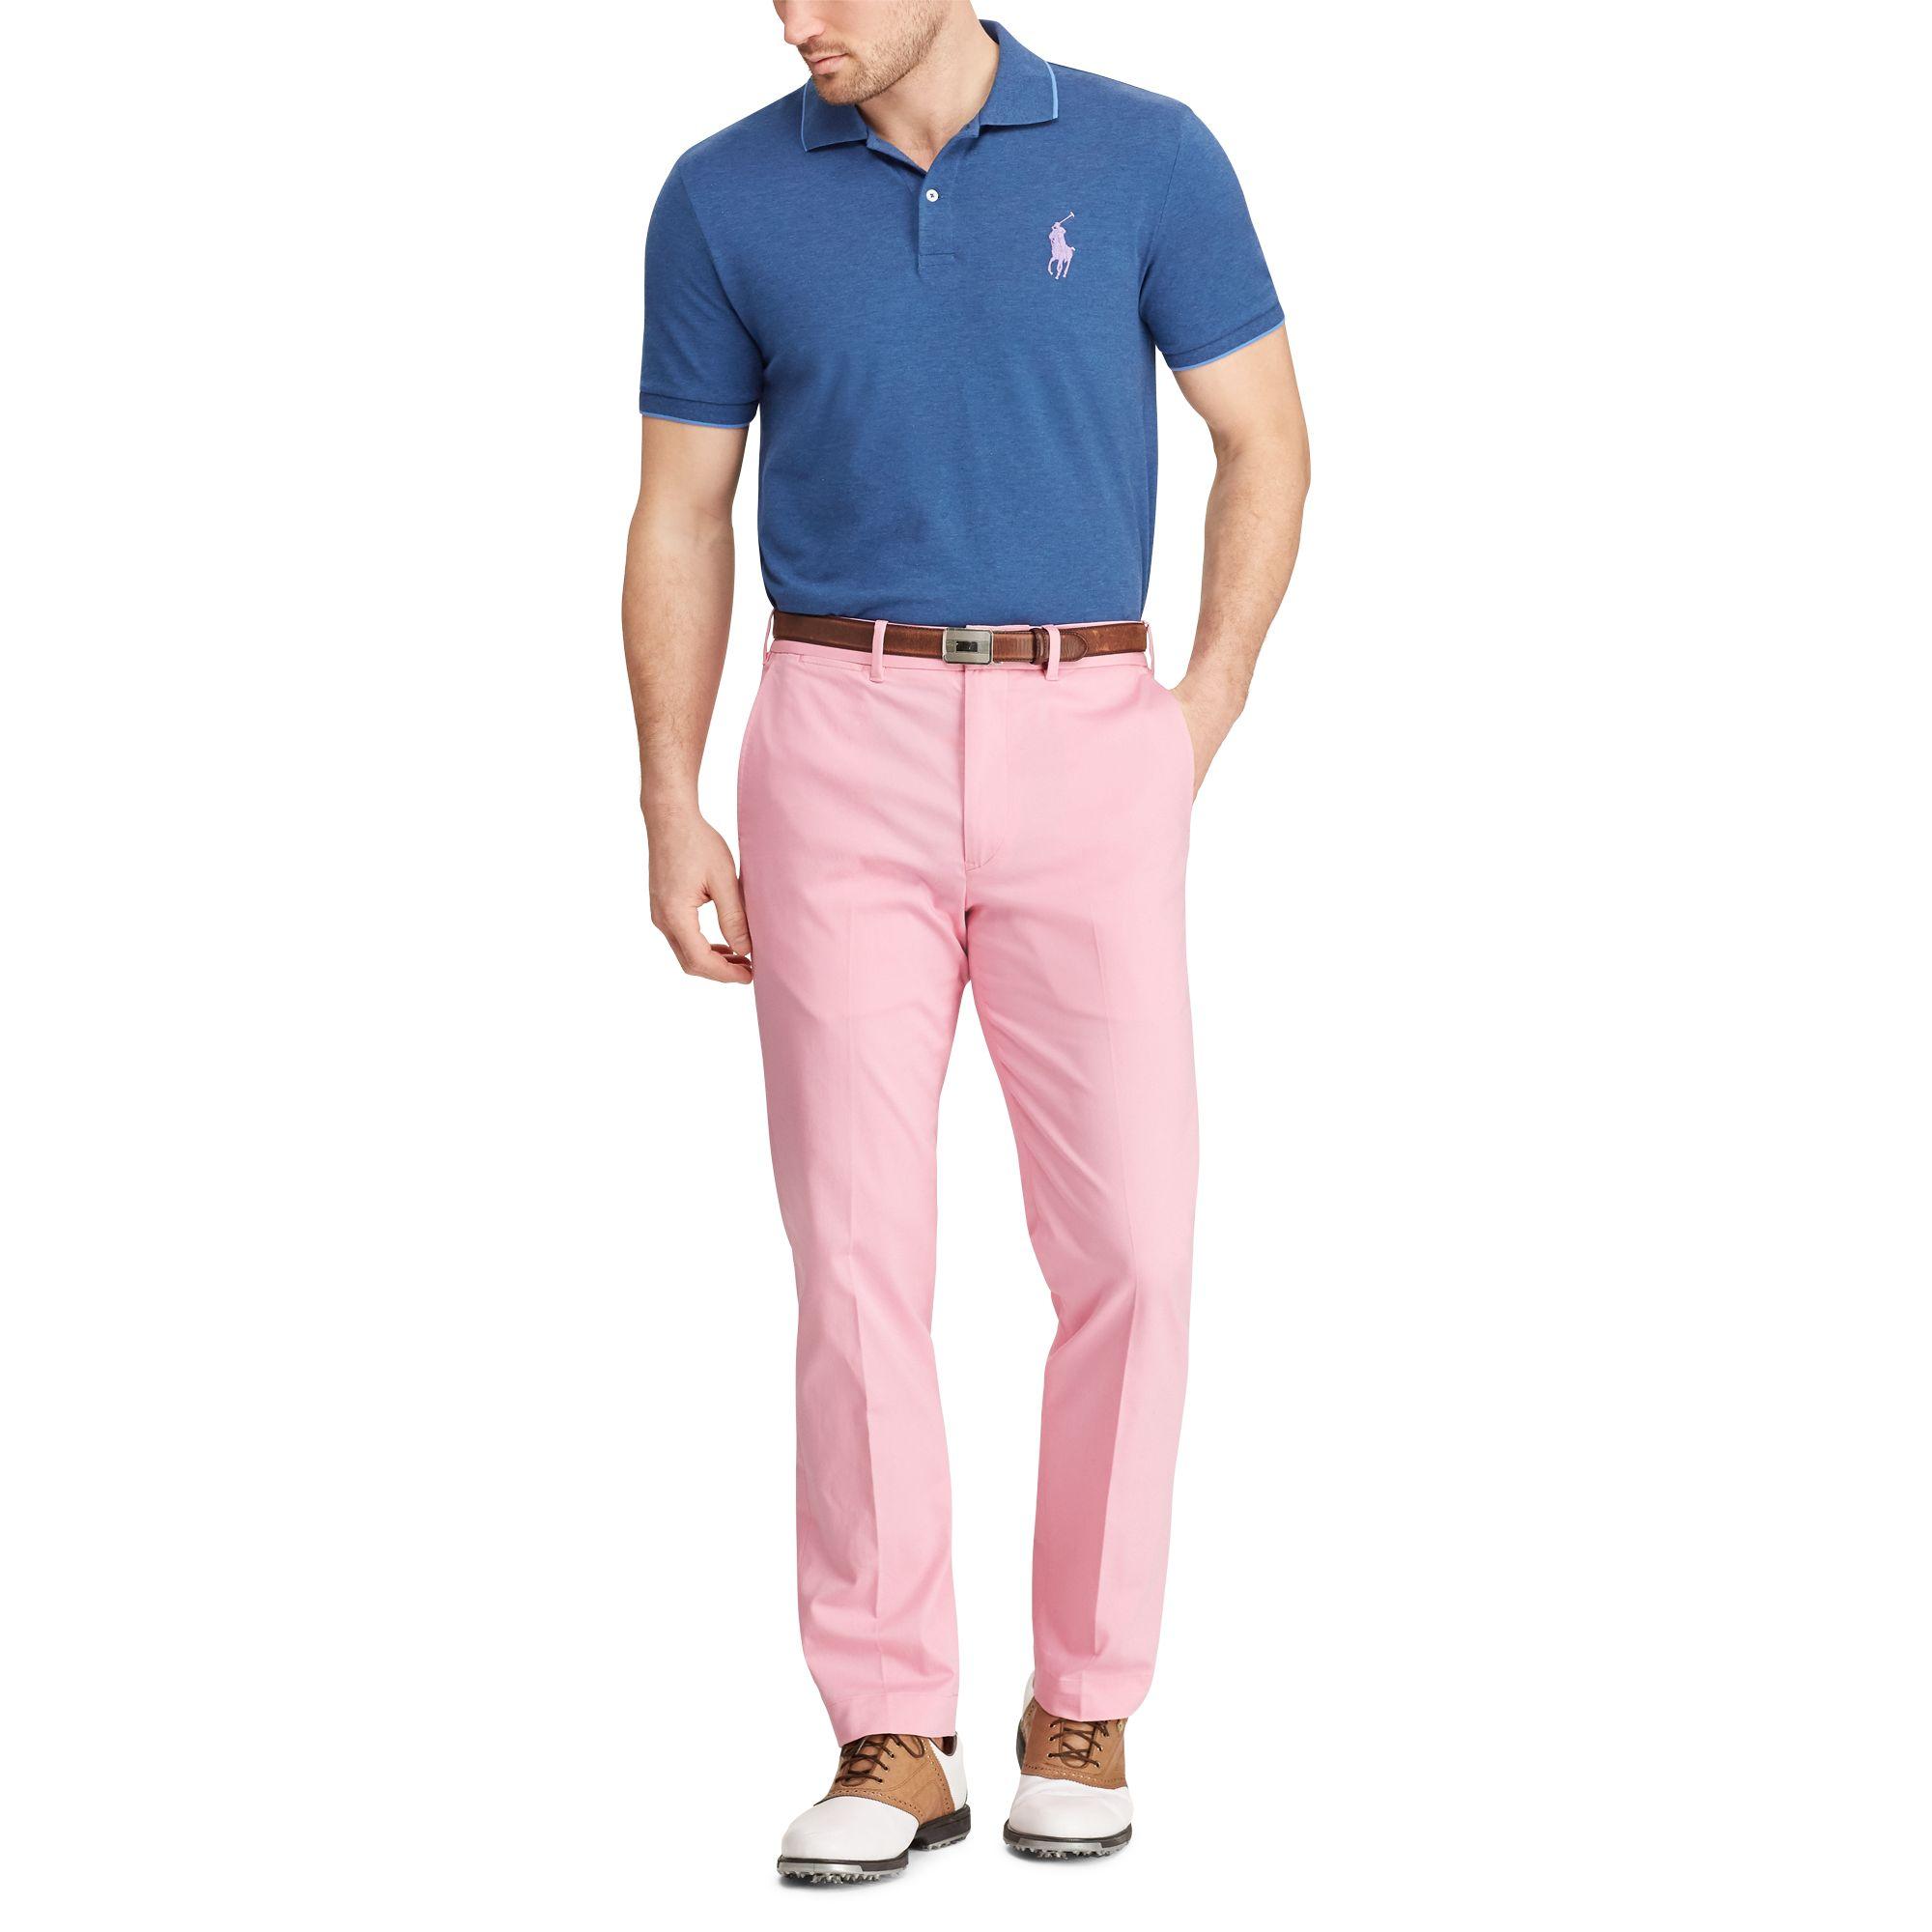 Ralph Lauren Tailored Fit Stretch Golf Pant in Pink for Men - Lyst